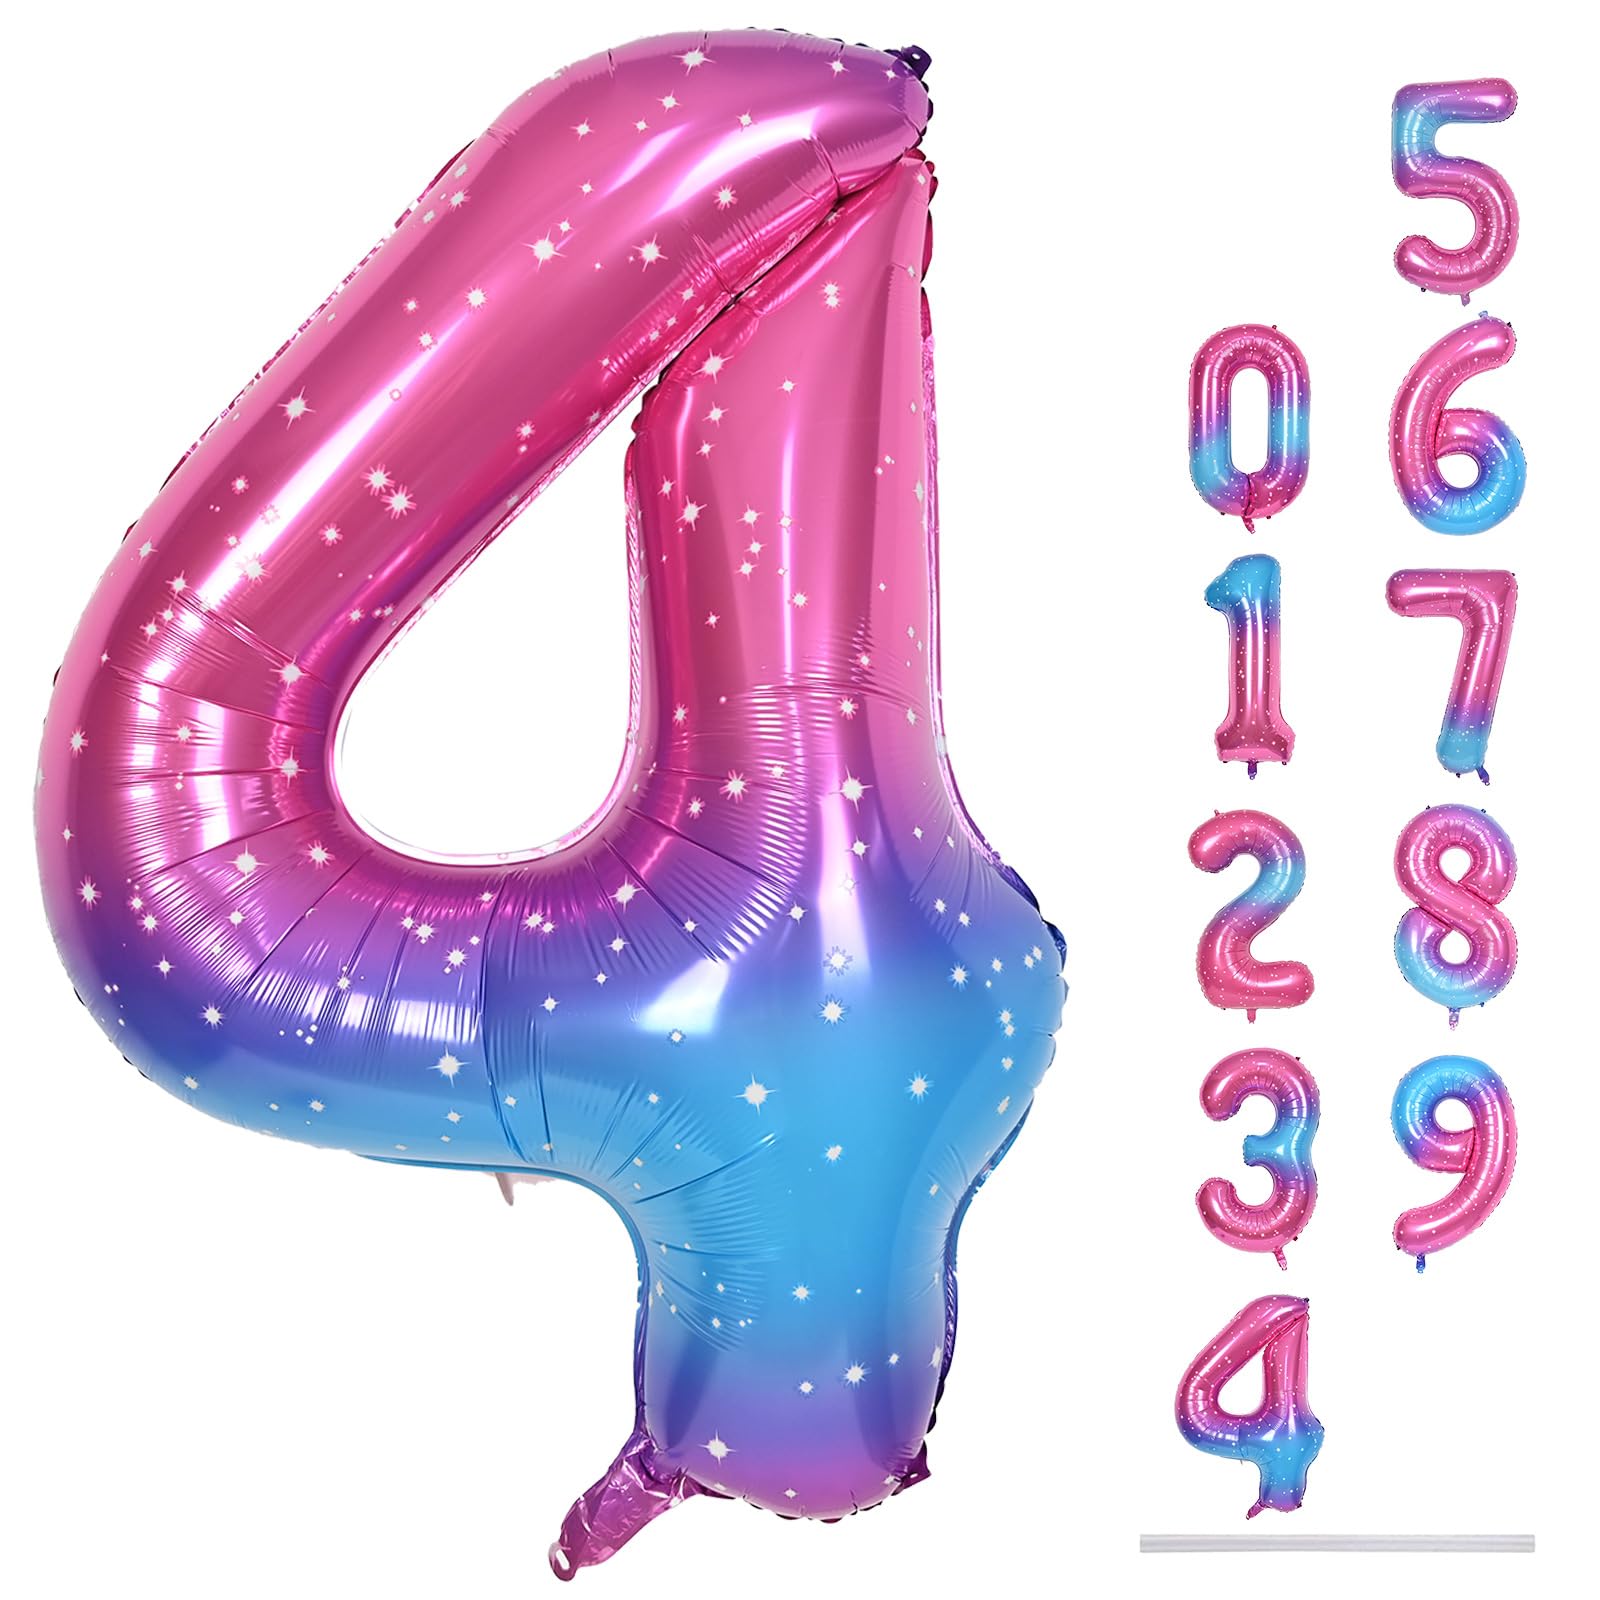 Lingqiang gradient Rainbow 4 Balloons, 40 Inch Large Blue Pink Purple Foil Number Balloons Set 0-9, Self Inflating Starry Digital 4 Helium